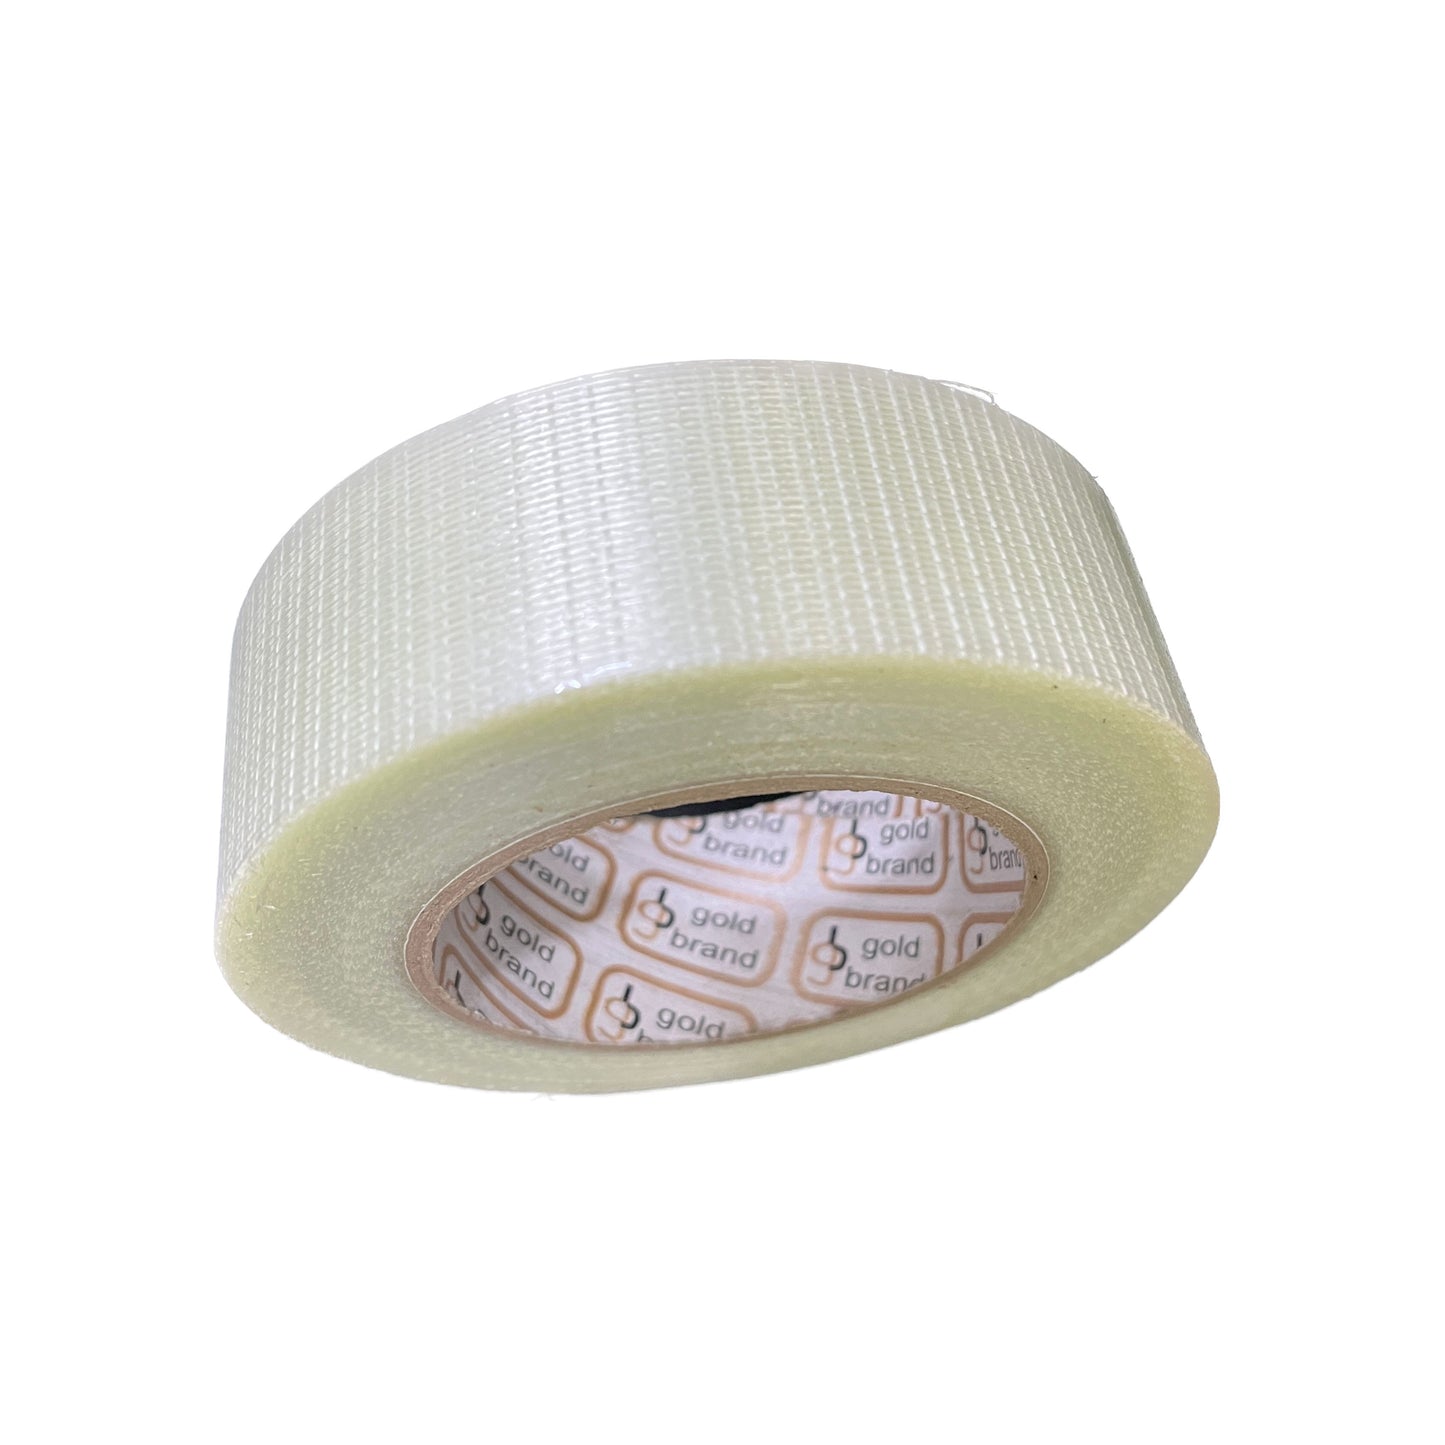 SS Side Tape Roll for Cricket Bat Protection (1.5 Inch)